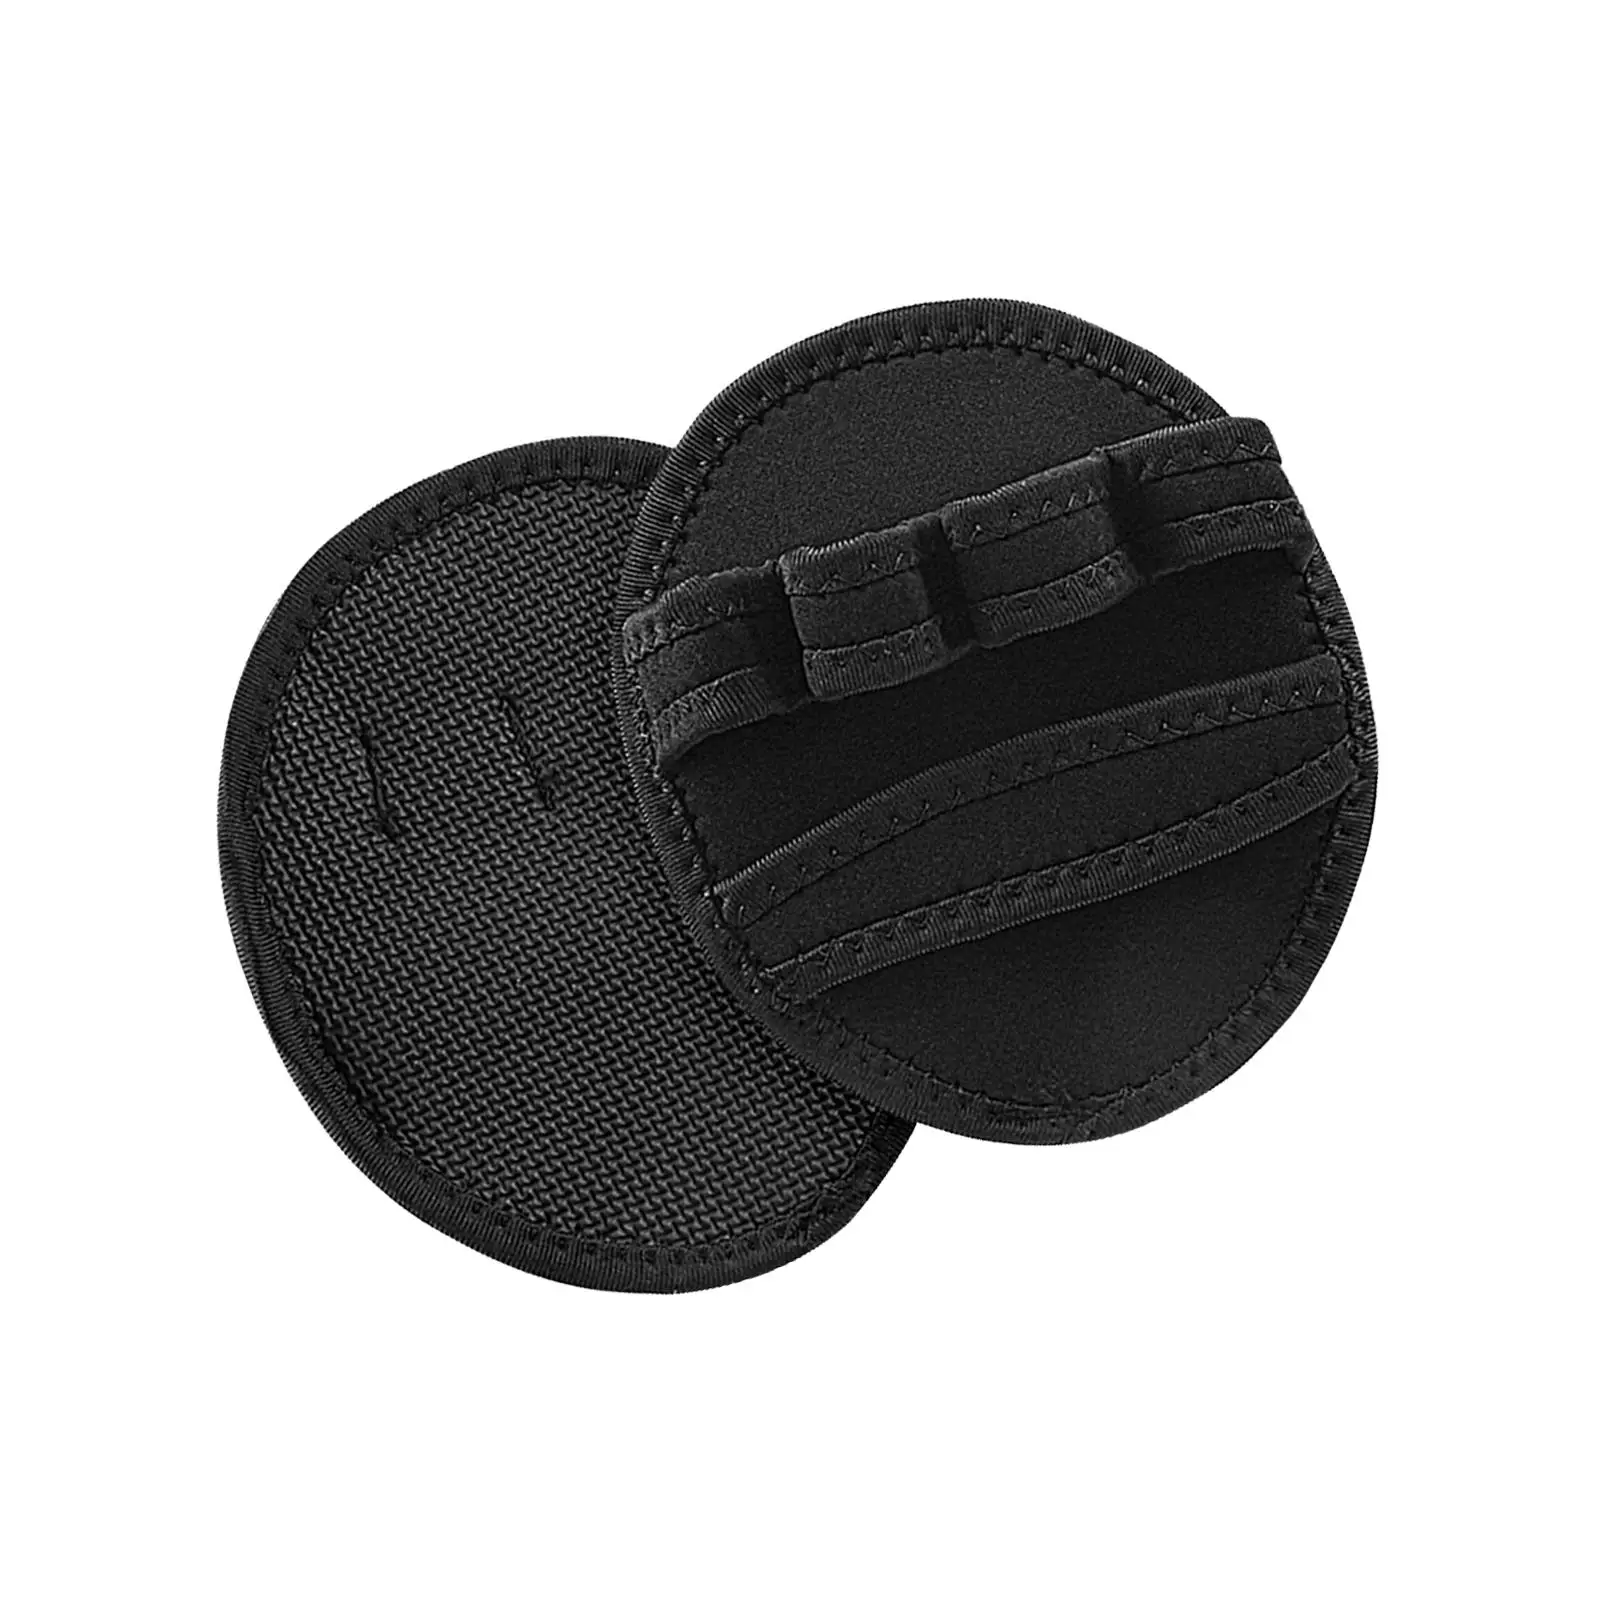 Lifting Pads for Weightlifting Unisex Workout Gloves for Sports Calisthenics